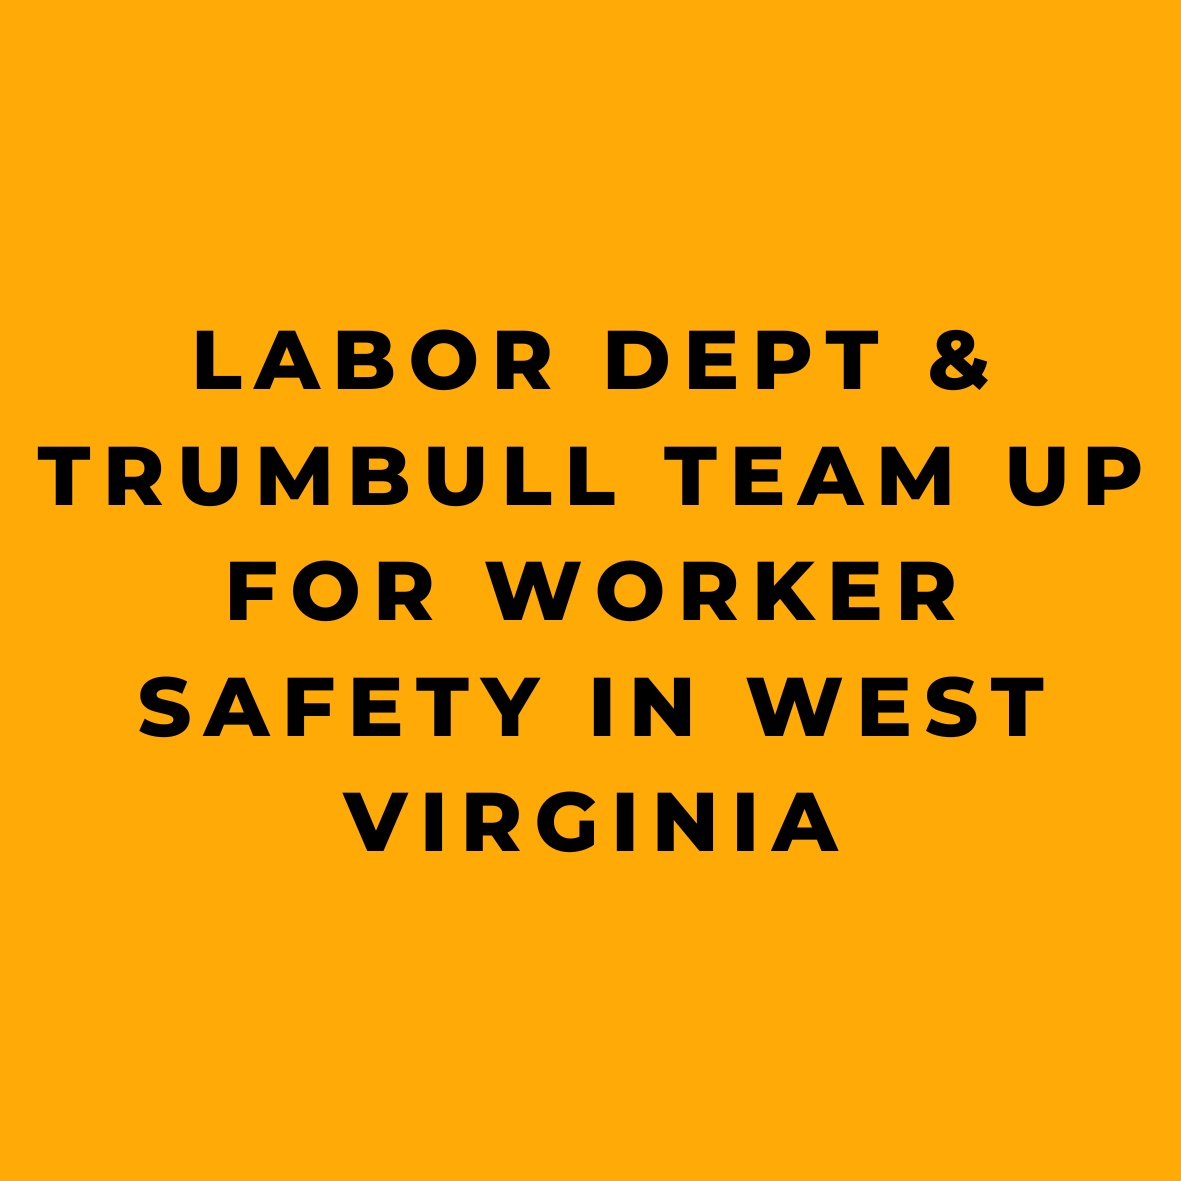 Labor Dept & Trumbull Team Up for Worker Safety in West Virginia